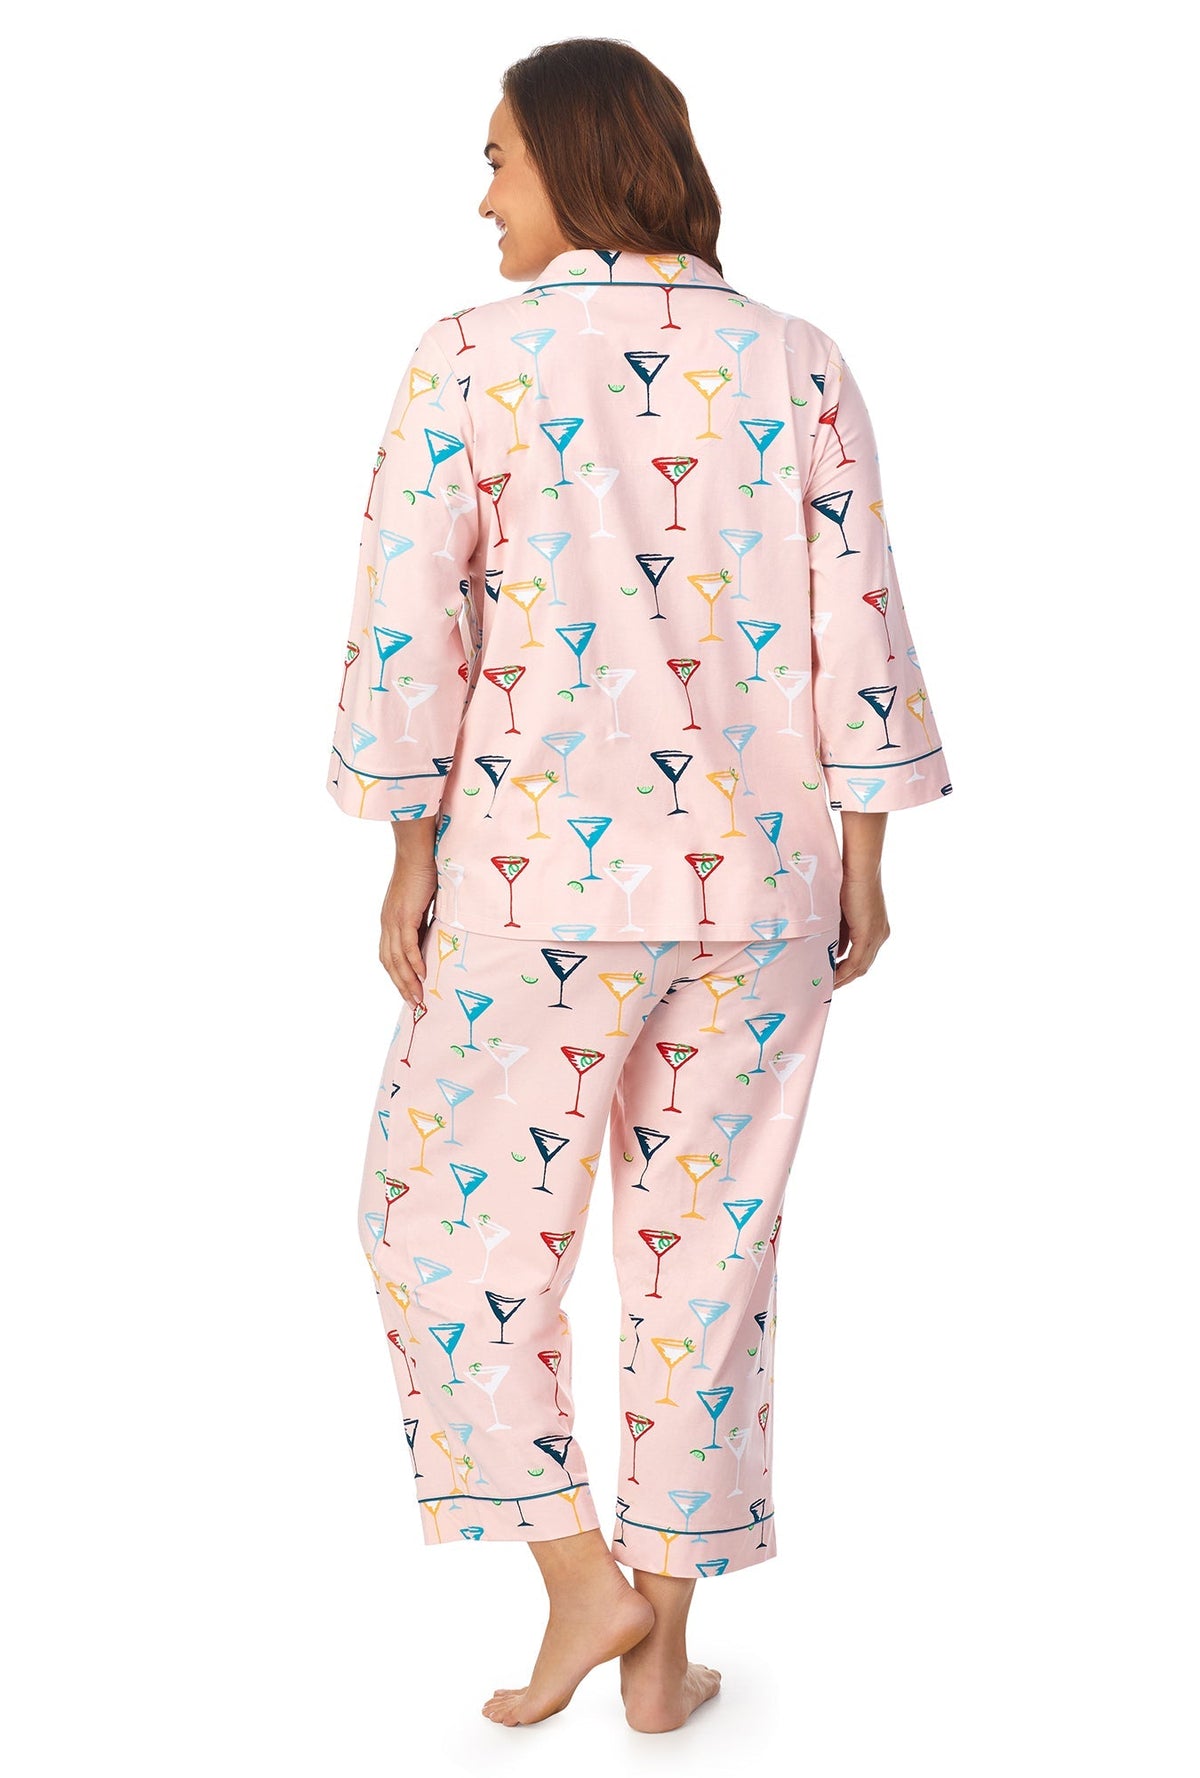 A lady wearing a pink quarter sleeve cropped plus size pj set with glass pattern.